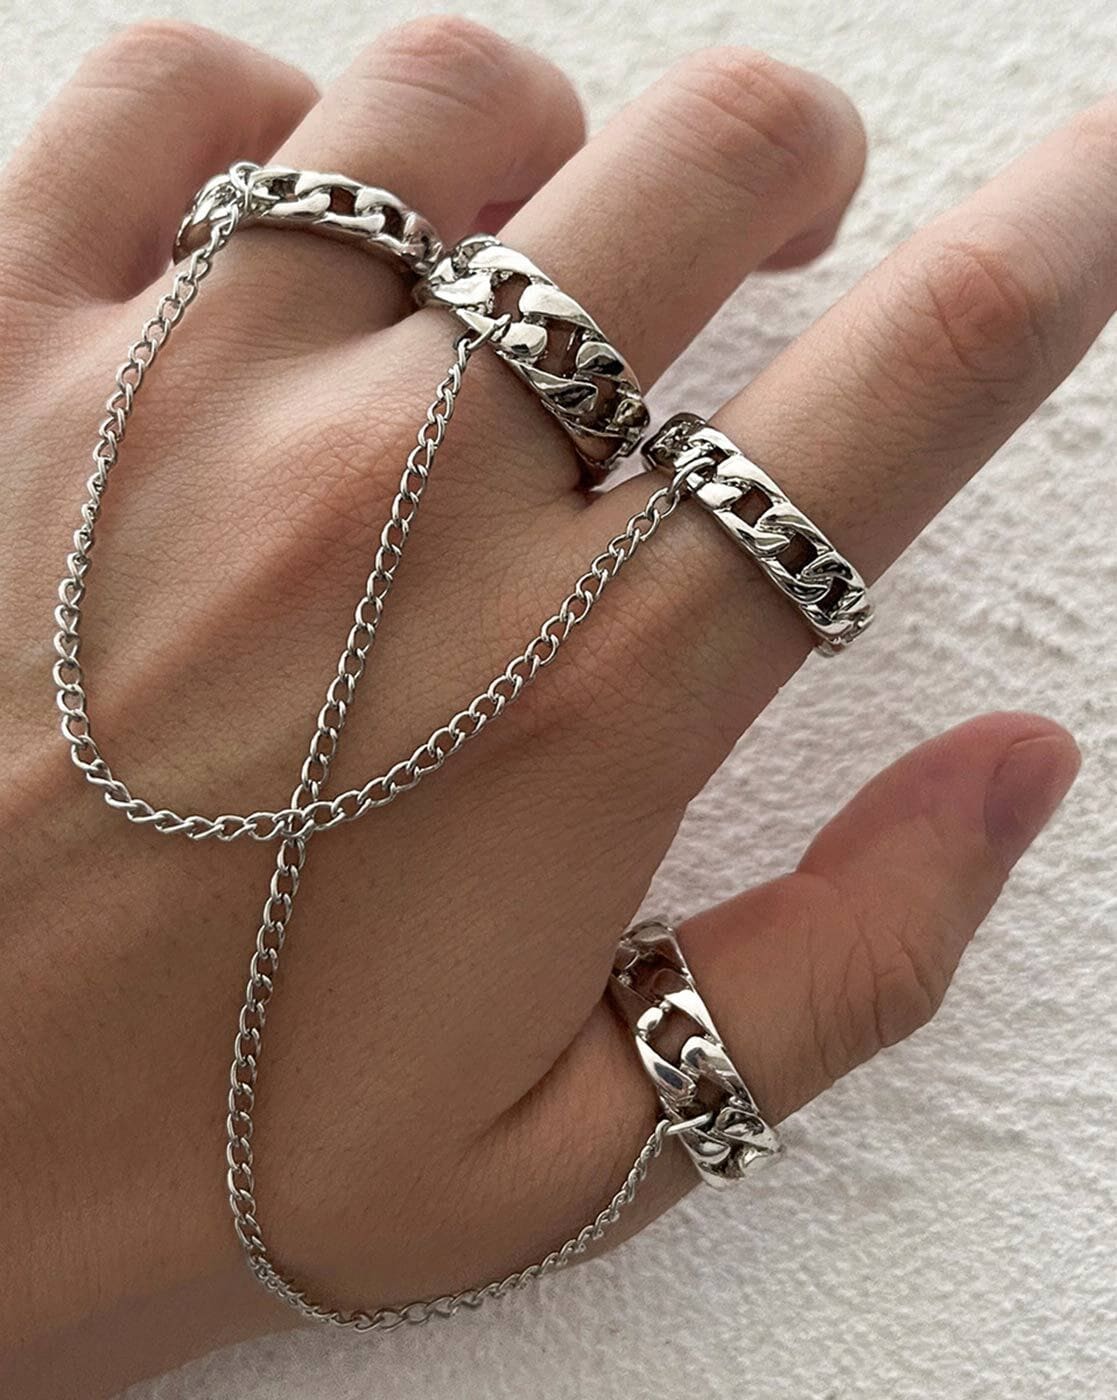 New Fashion Silver Color Hip-Hop Cross Ring Hand Finger Chain Adjustable  Rings for Women Men Punk Jewelry Gifts | Wish